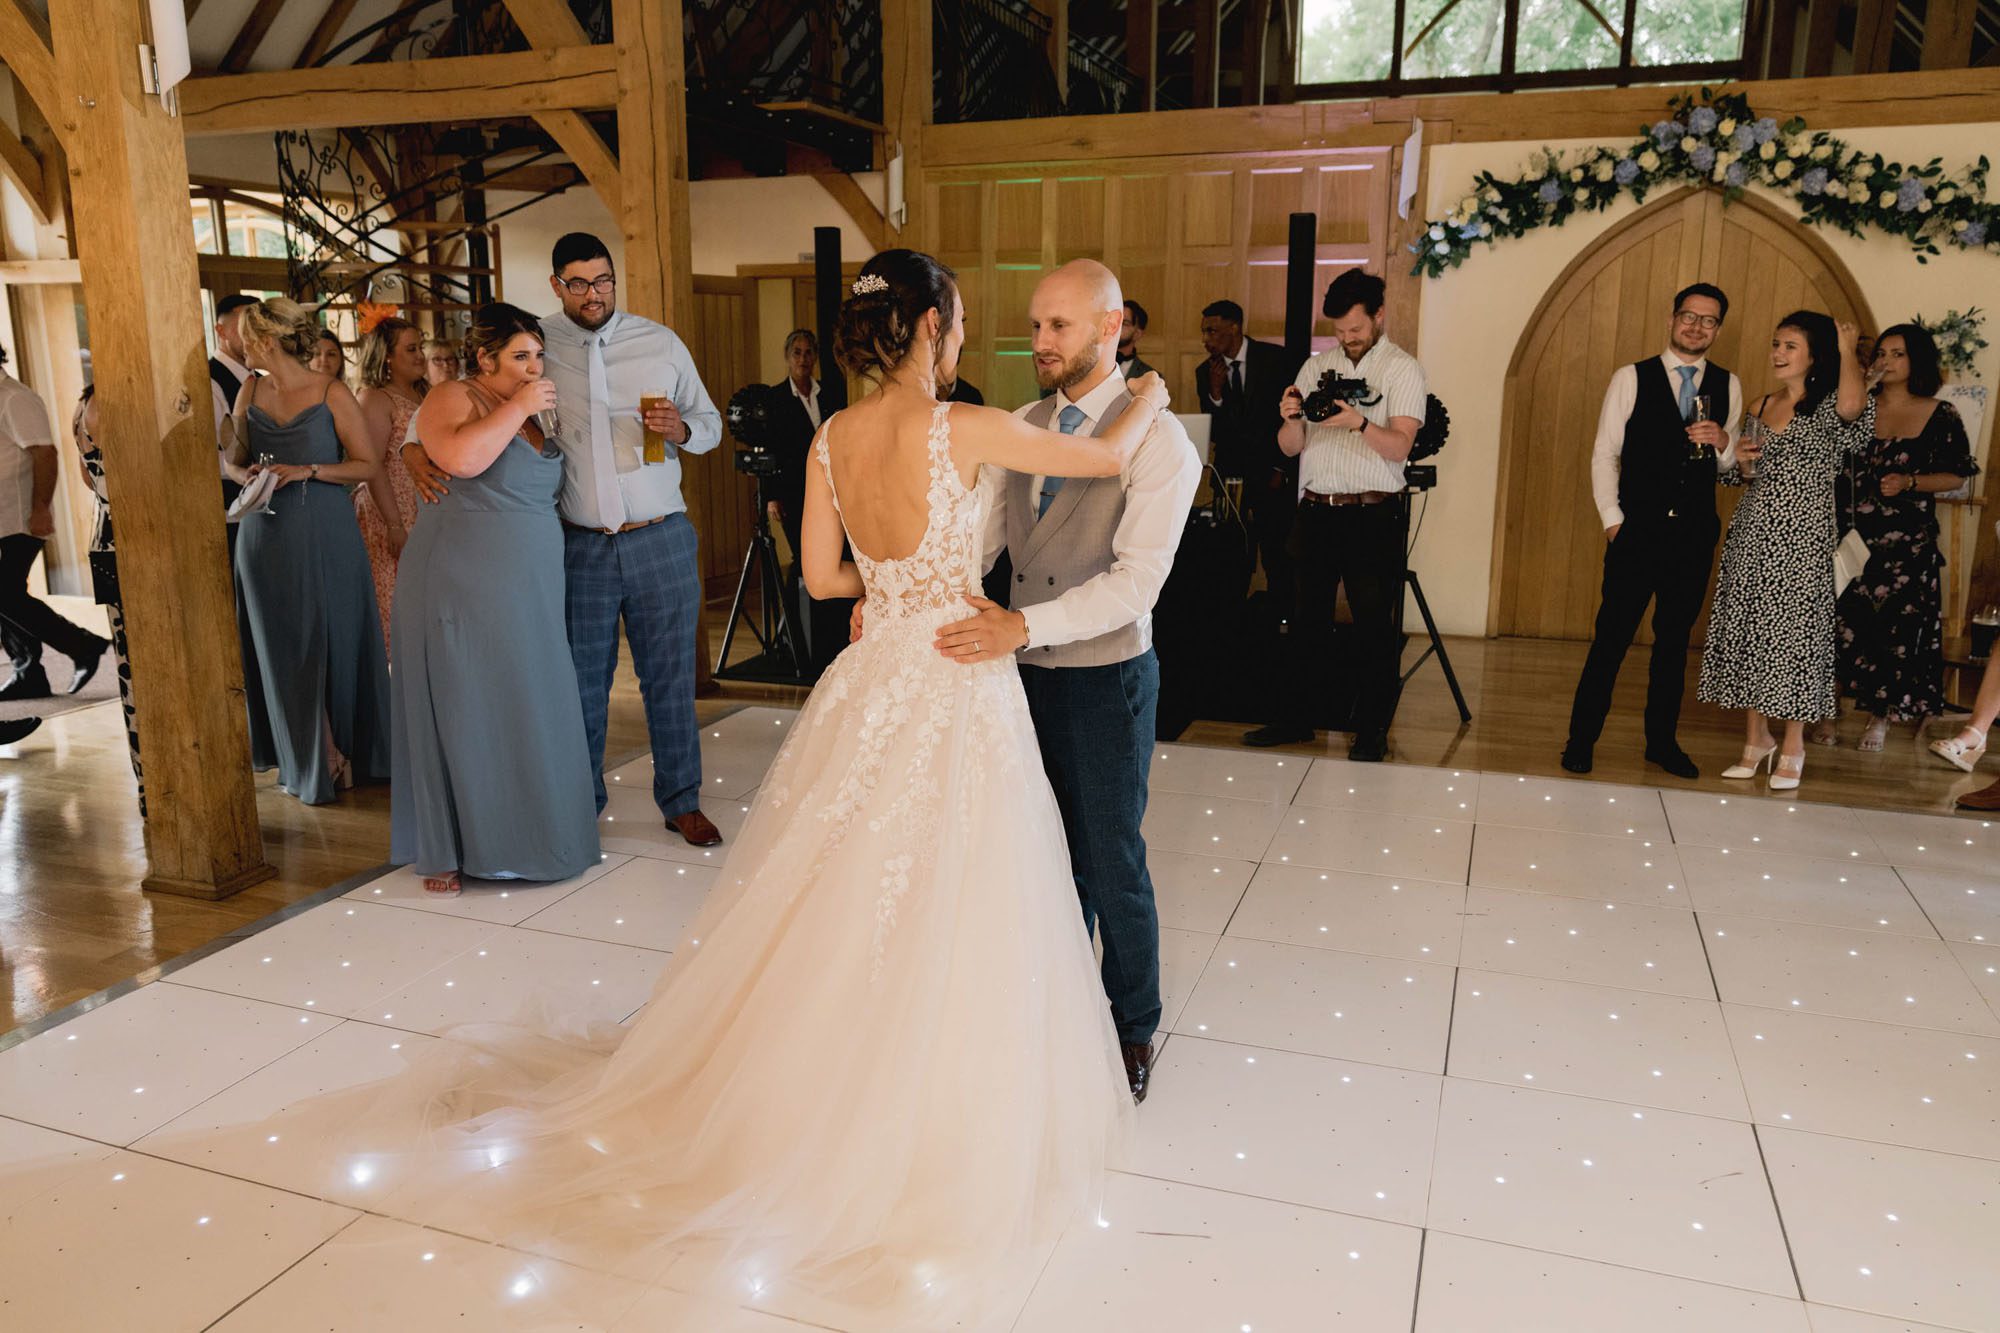 Bride and groom have their first dance together on their wedding day at Rivervale Barn in Hampshire.